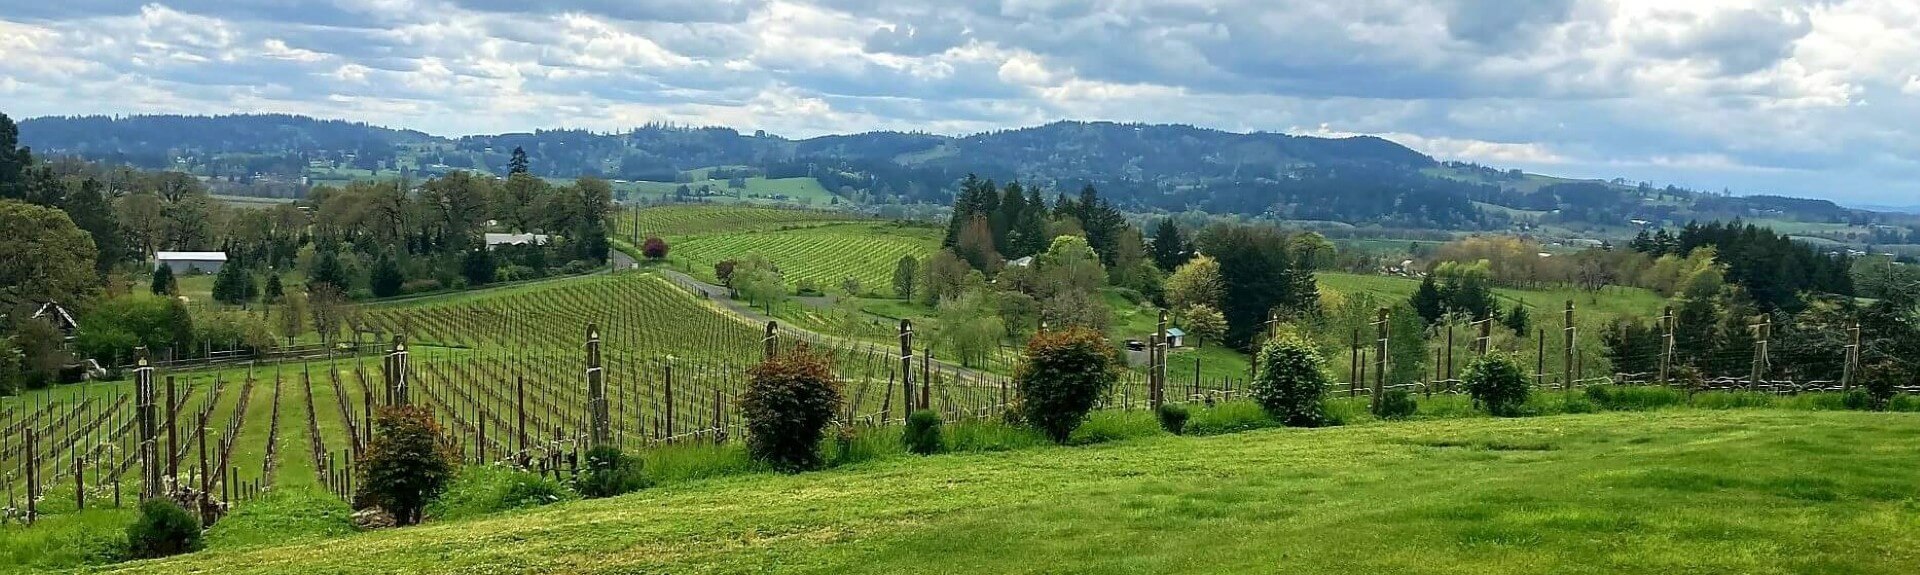 Experience the Beauty of the Willamette Valley